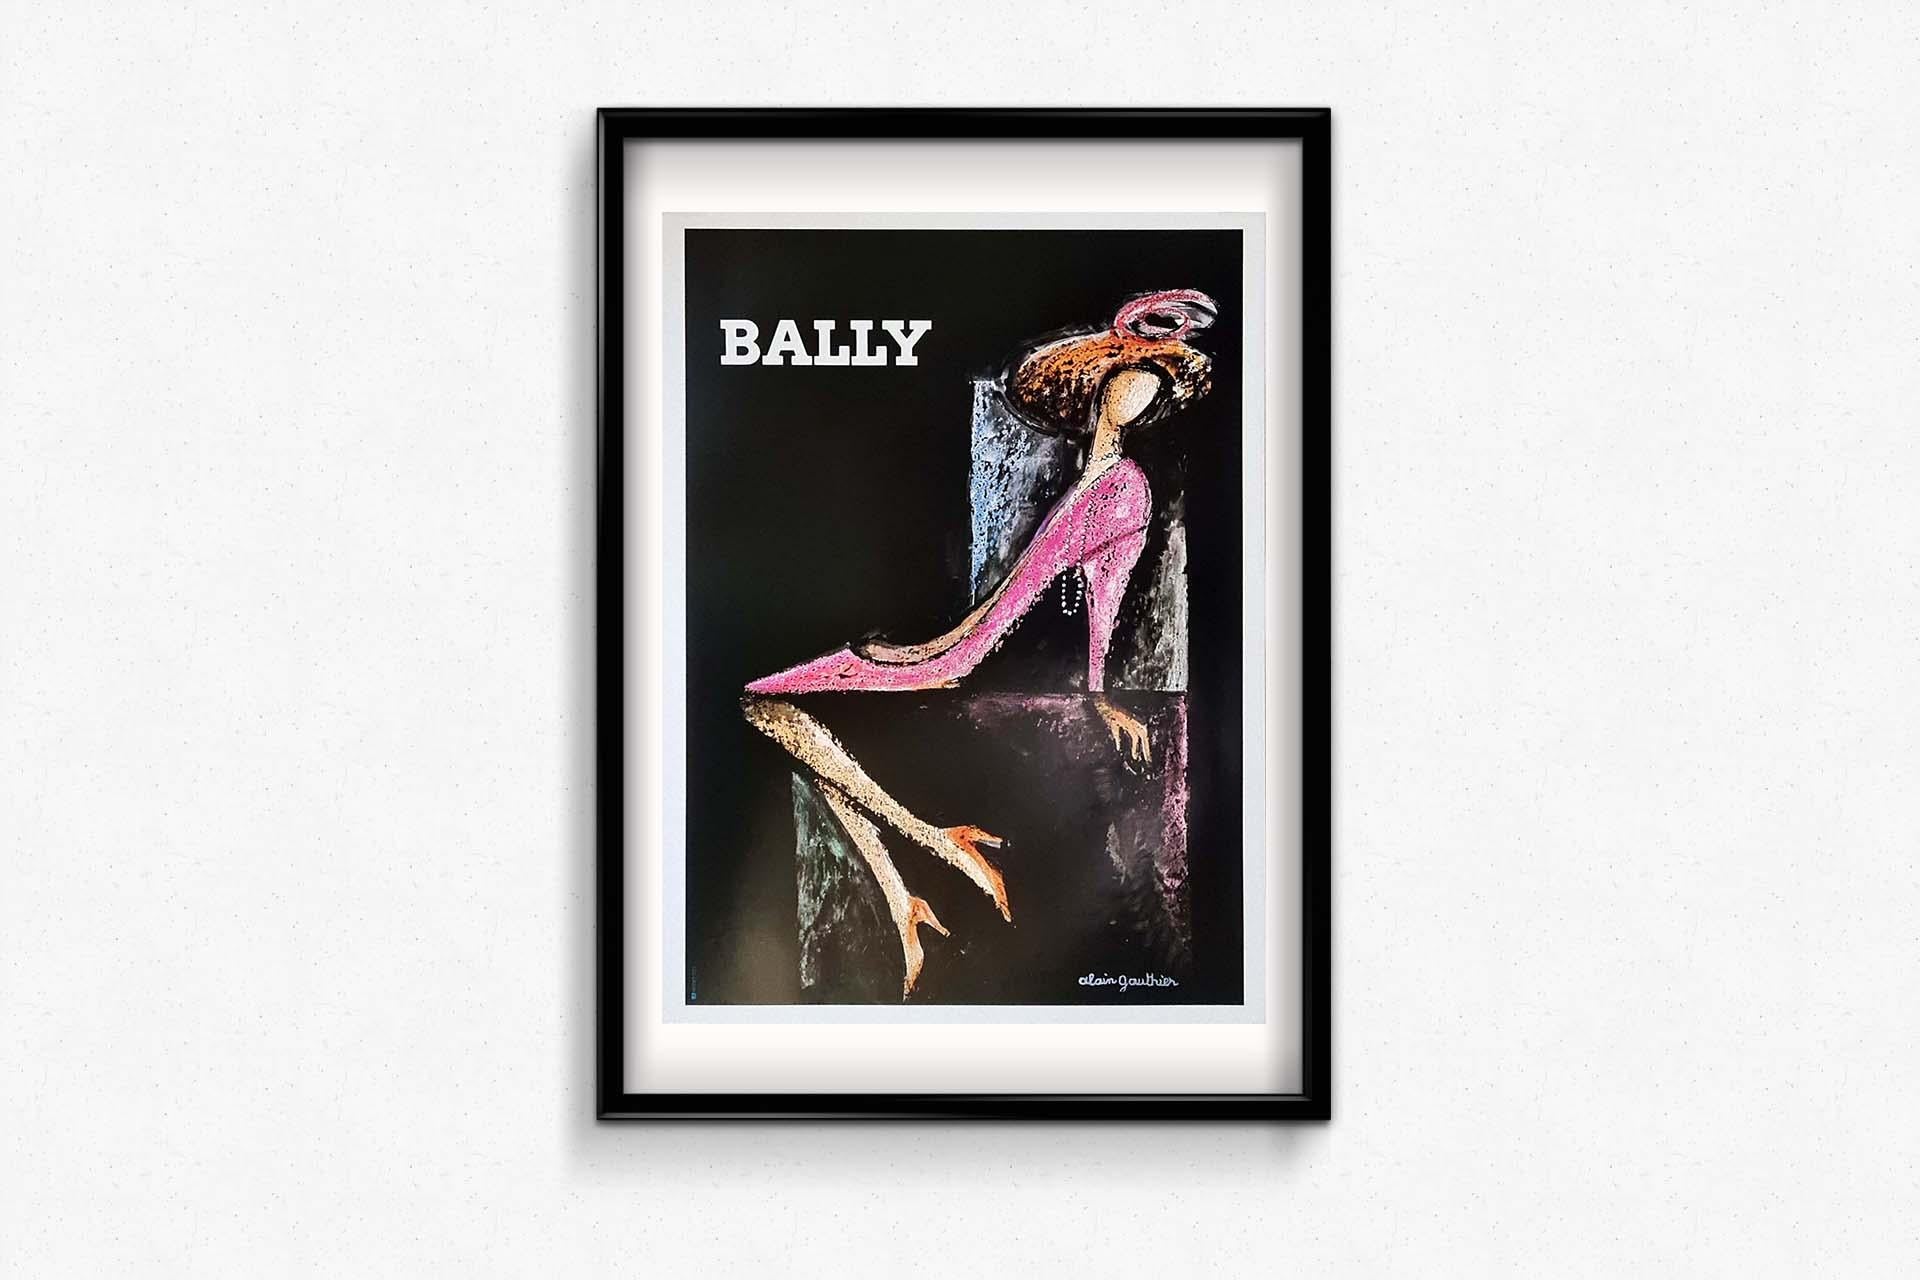 Beautiful original poster by Alain Gauthier for Bally women's shoes. Bally is a company founded as Bally & Co in 1851 by Carl Franz Bally (1821-1899) and his brother Fritz in the basement of the family home in Schönenwerd (Solothurn), Switzerland.